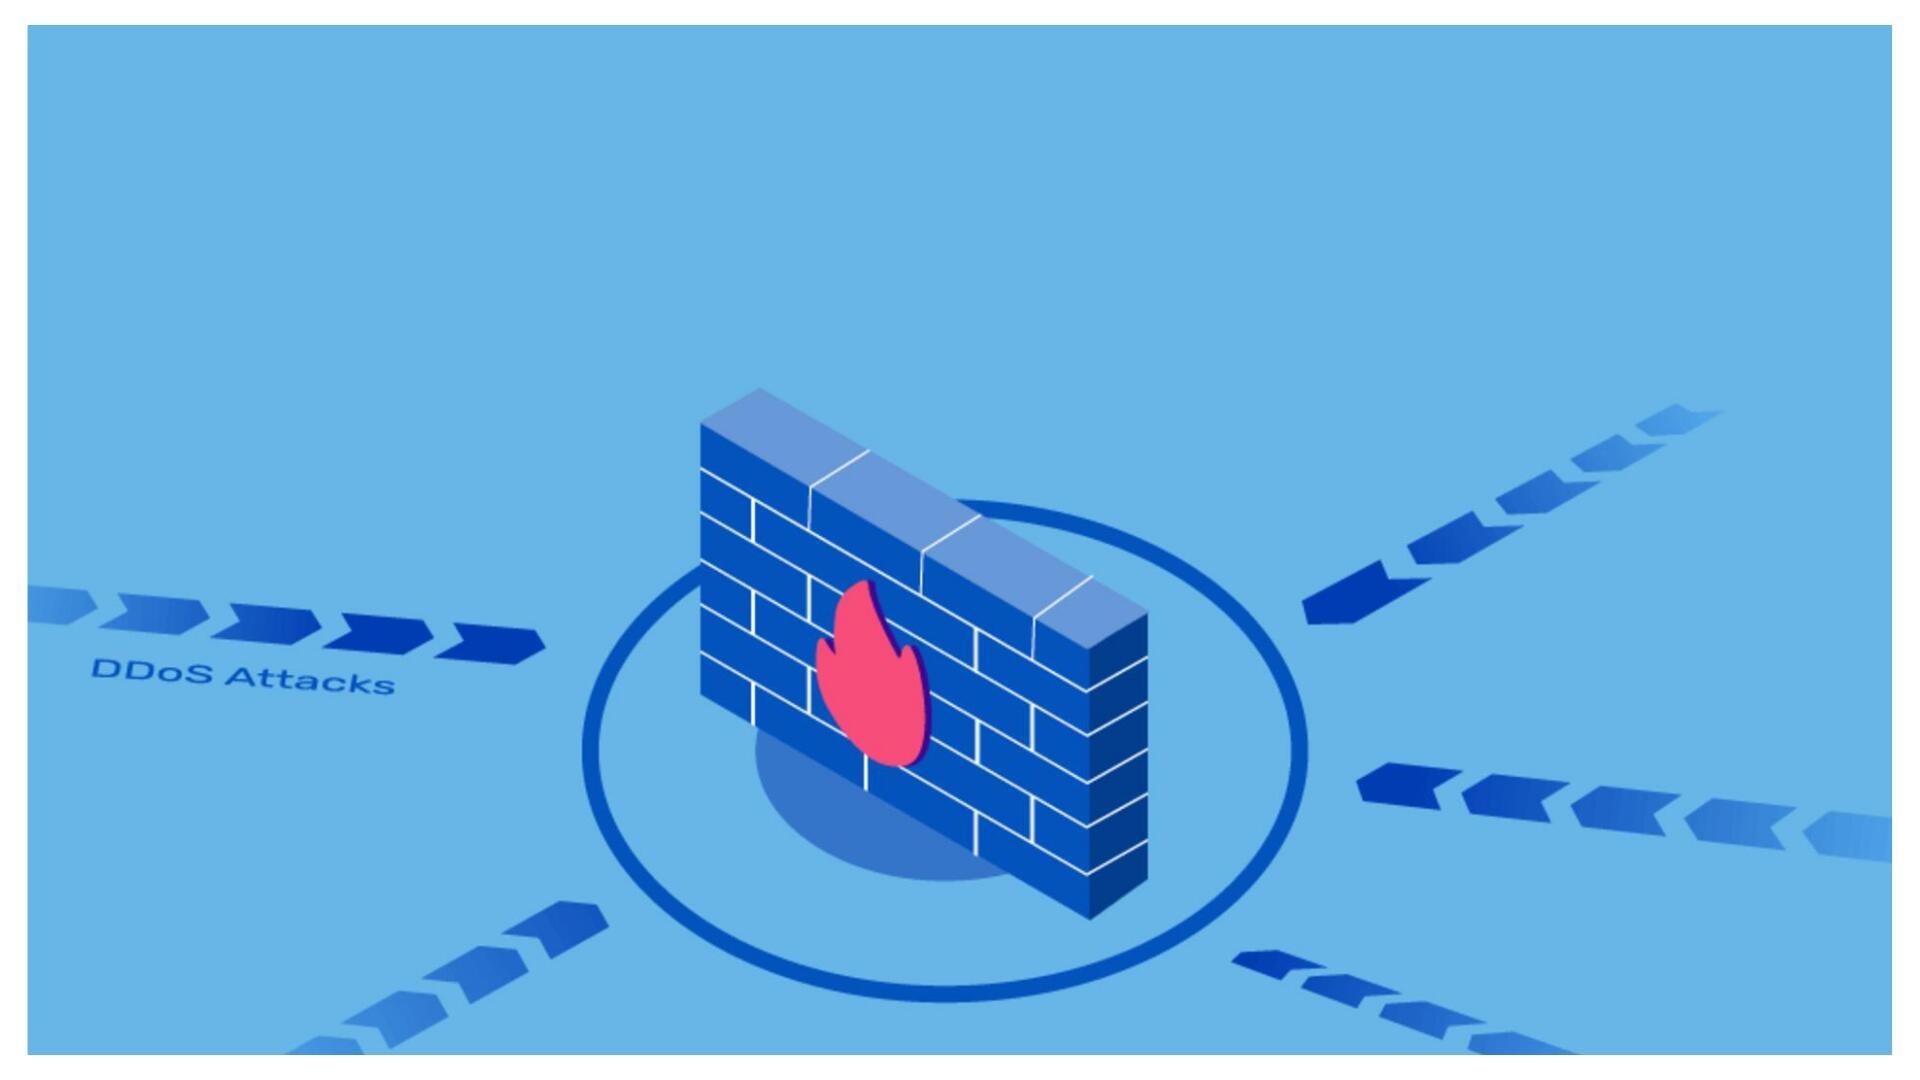 Web Application Firewall: The Risks of Free Security Tools